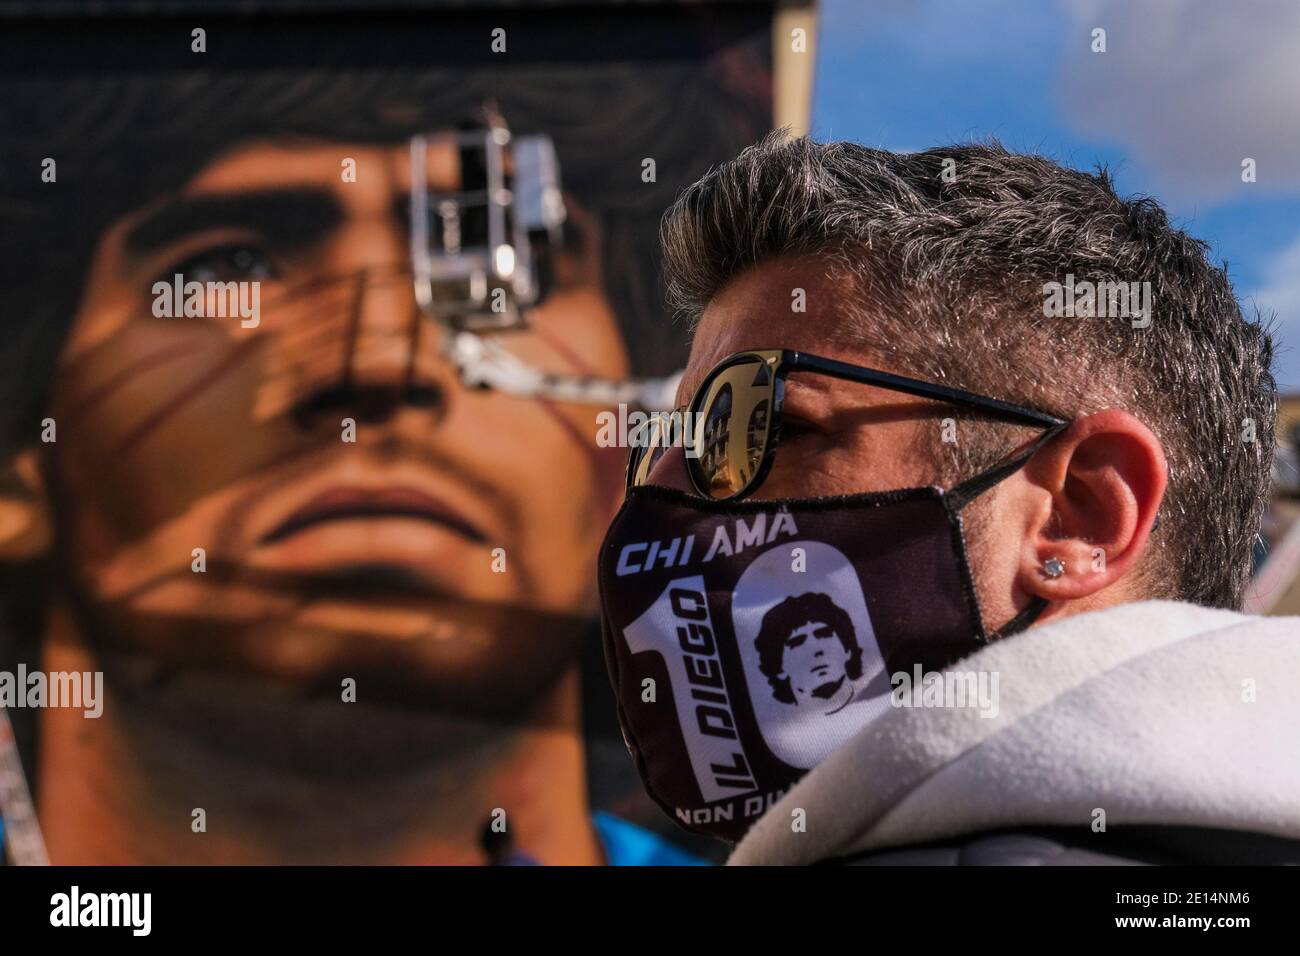 Luigi a local boy wears a mask to contain the infection from COVID- 19 depicting Maradona in the square to admire the new mural Jorit Agoch street artist from Naples, creates his new mural in quarto in the province of Naples the face of Diego Armando Maradona died on 25 November 2020, Dique Luj‡n, Argentina, former player of ssc napoli from 1984 to 1991. The figure of maradona in naples and the province is revered as a saint. Stock Photo